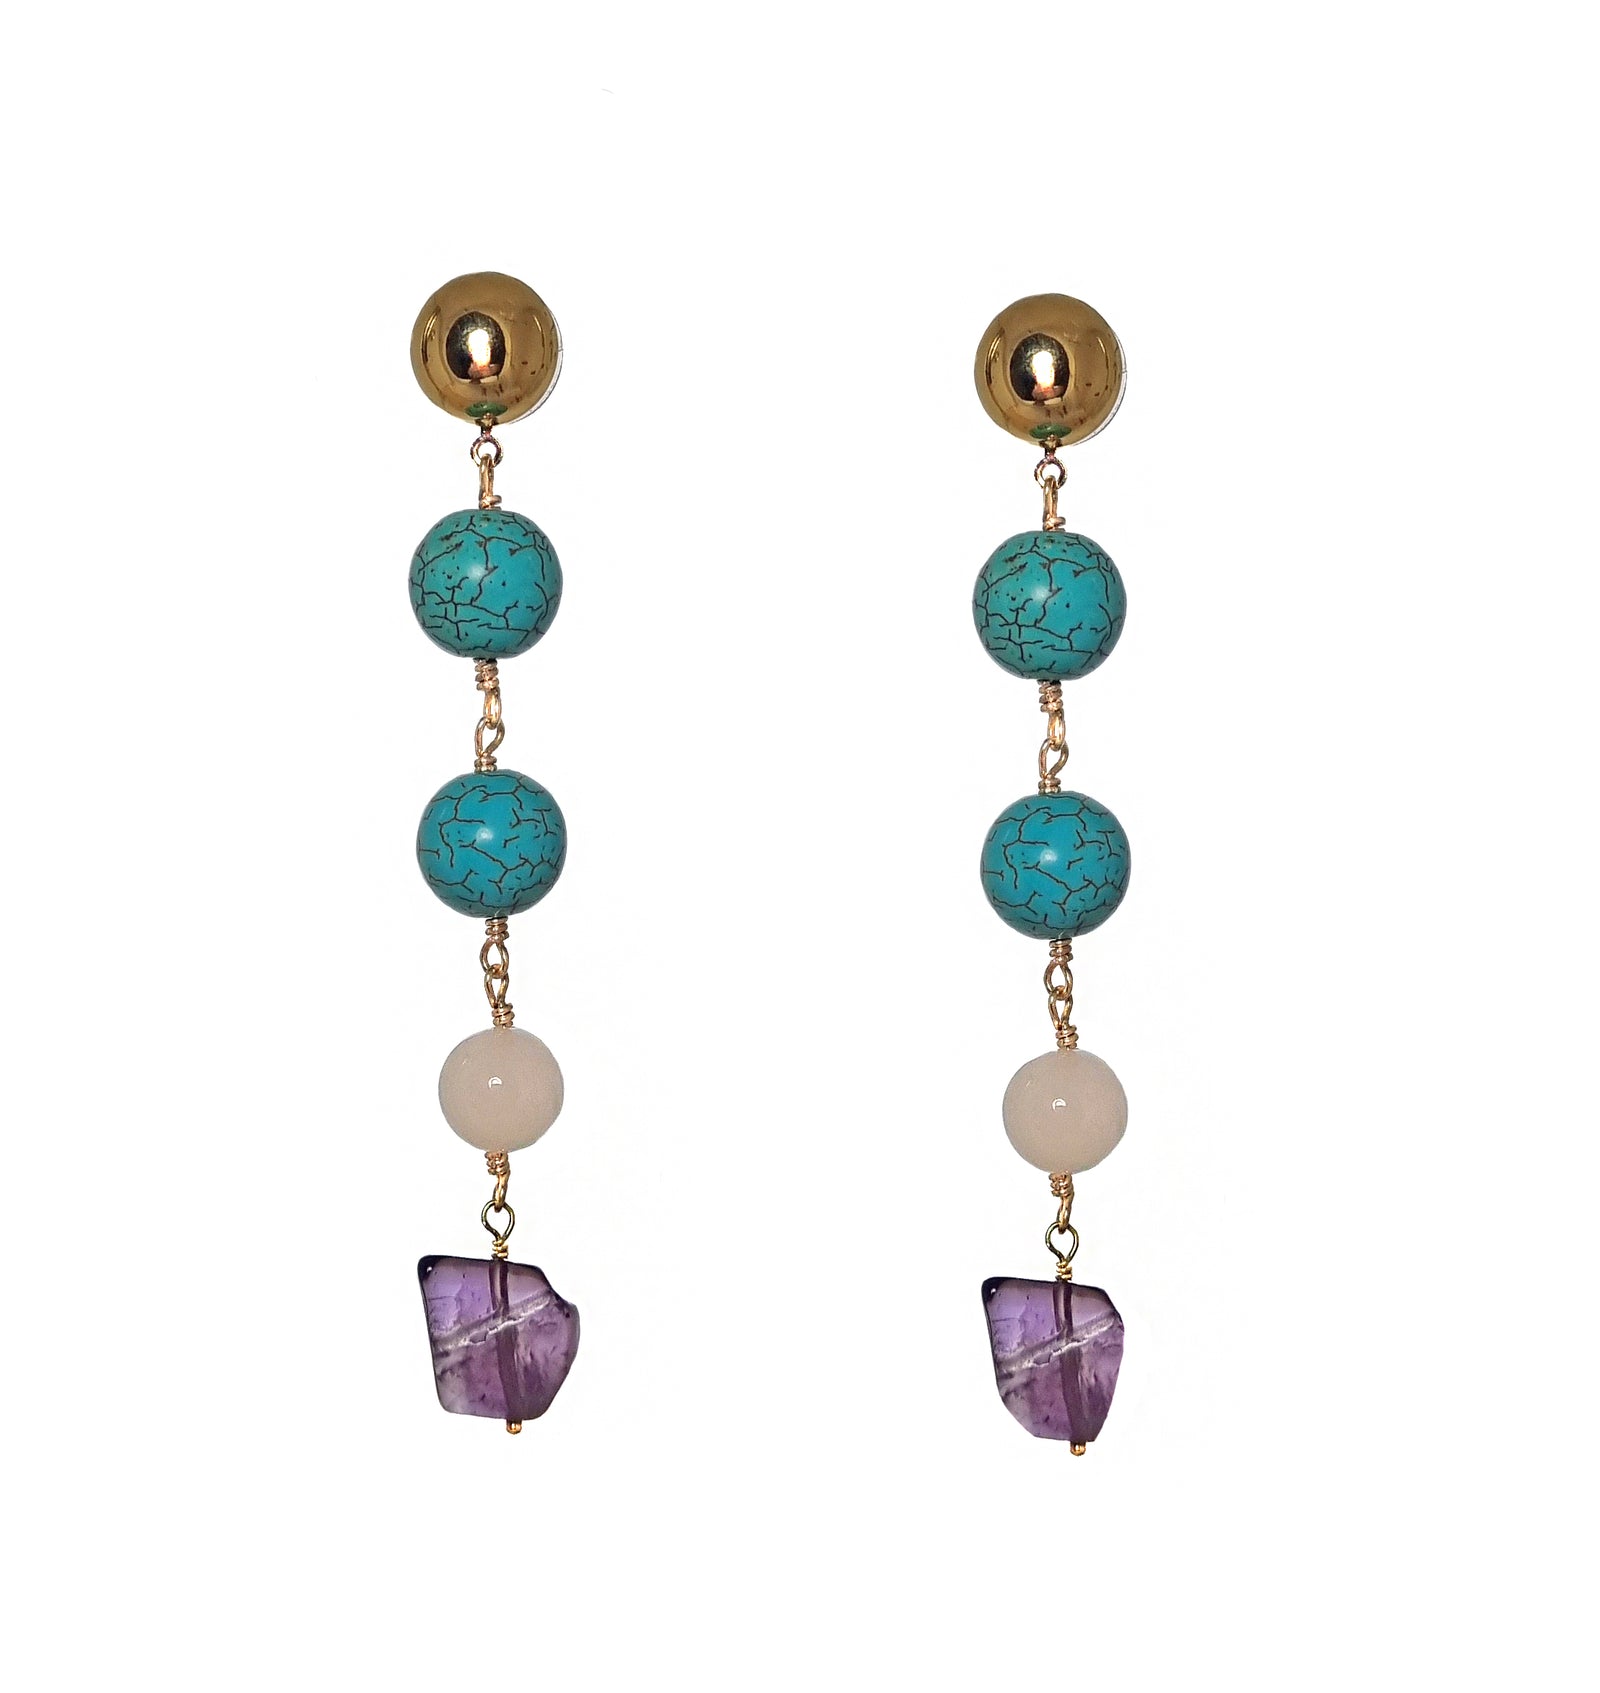 MARKELLA Turquoise and Amethyst Earrings